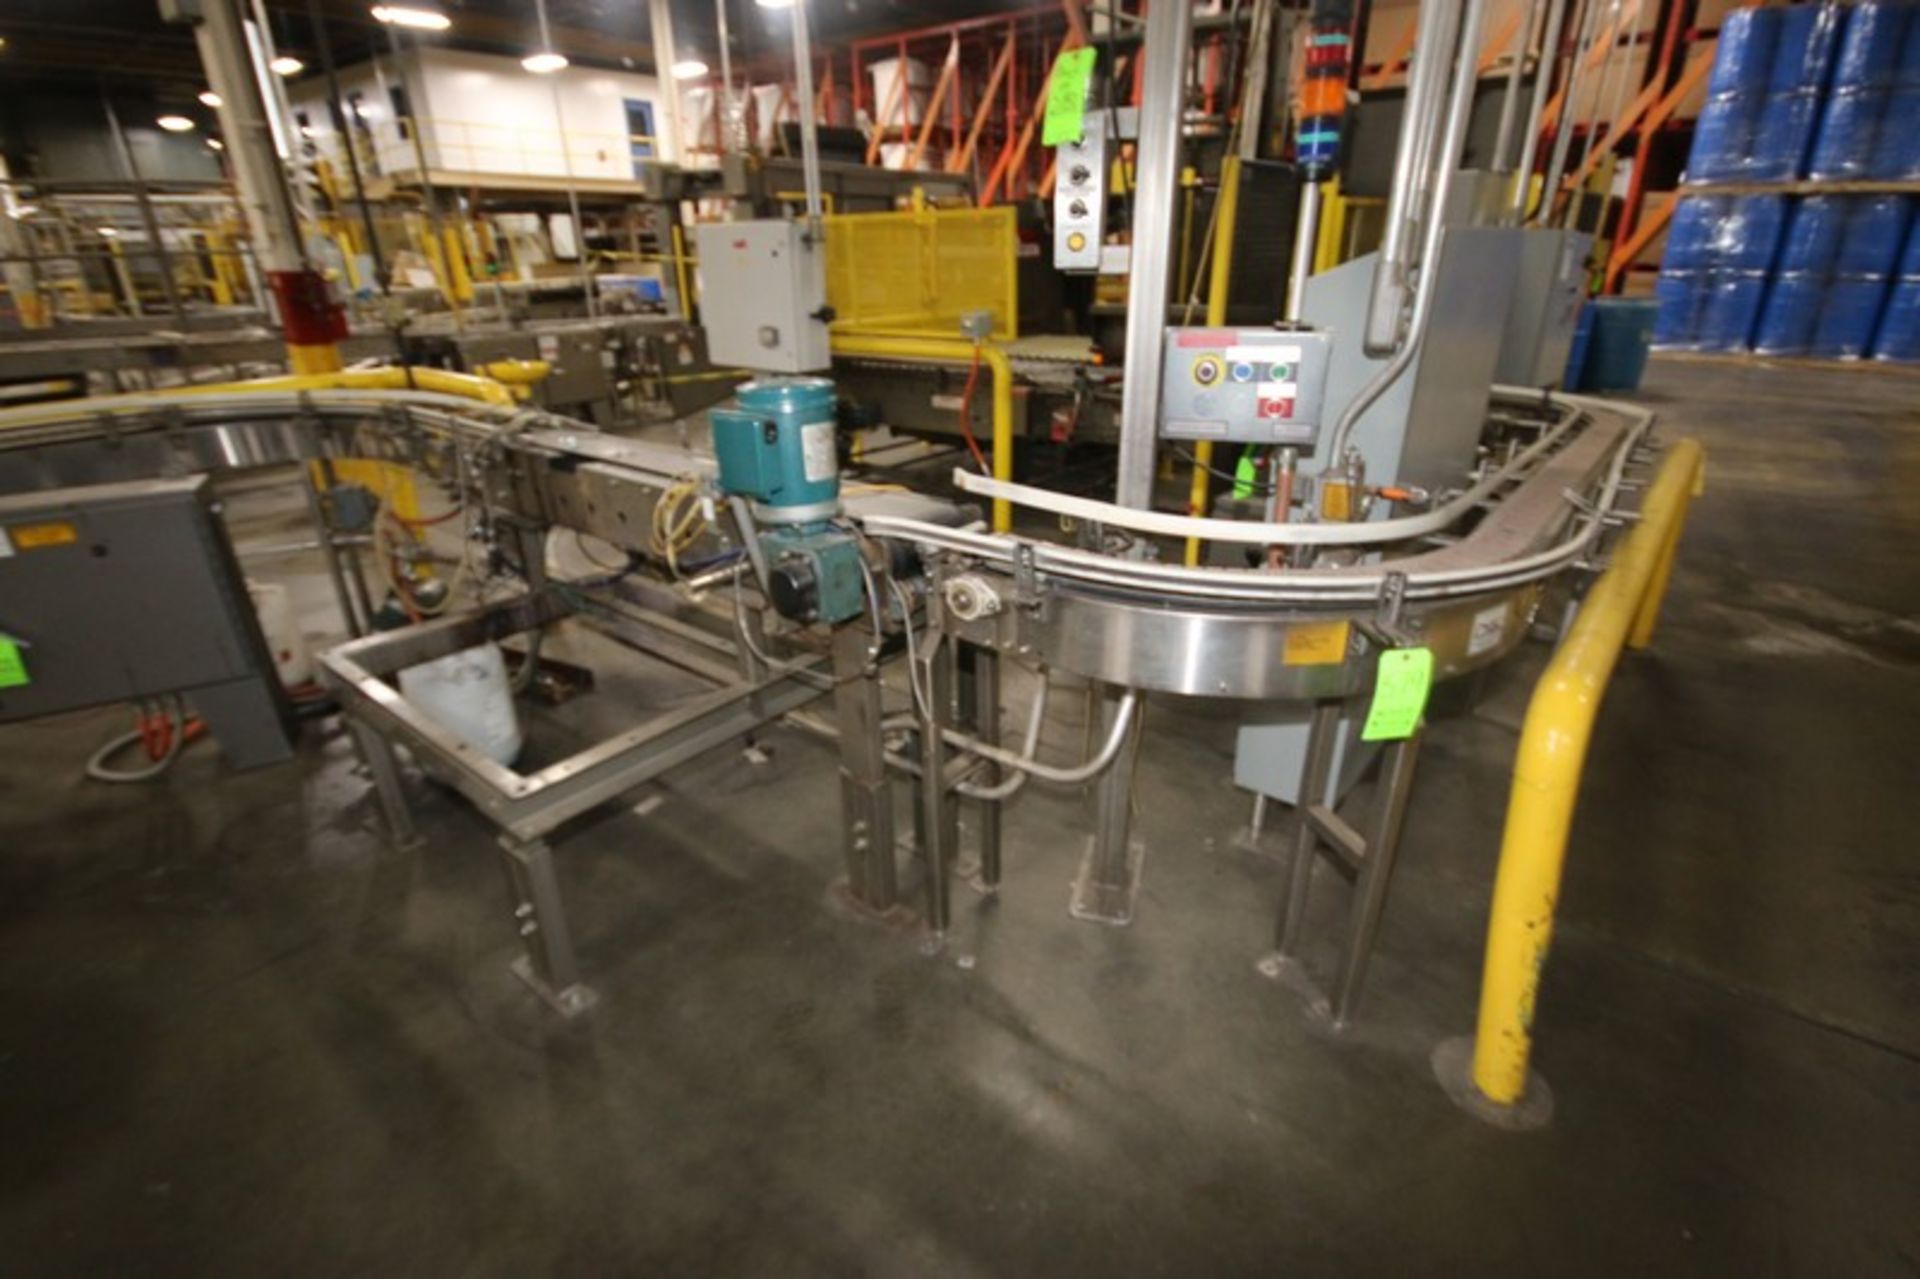 5-Sections of CHSC Product Conveyor, with Aprox. 4" W Plastic Chain, Mounted on S/S Frame & - Image 2 of 4